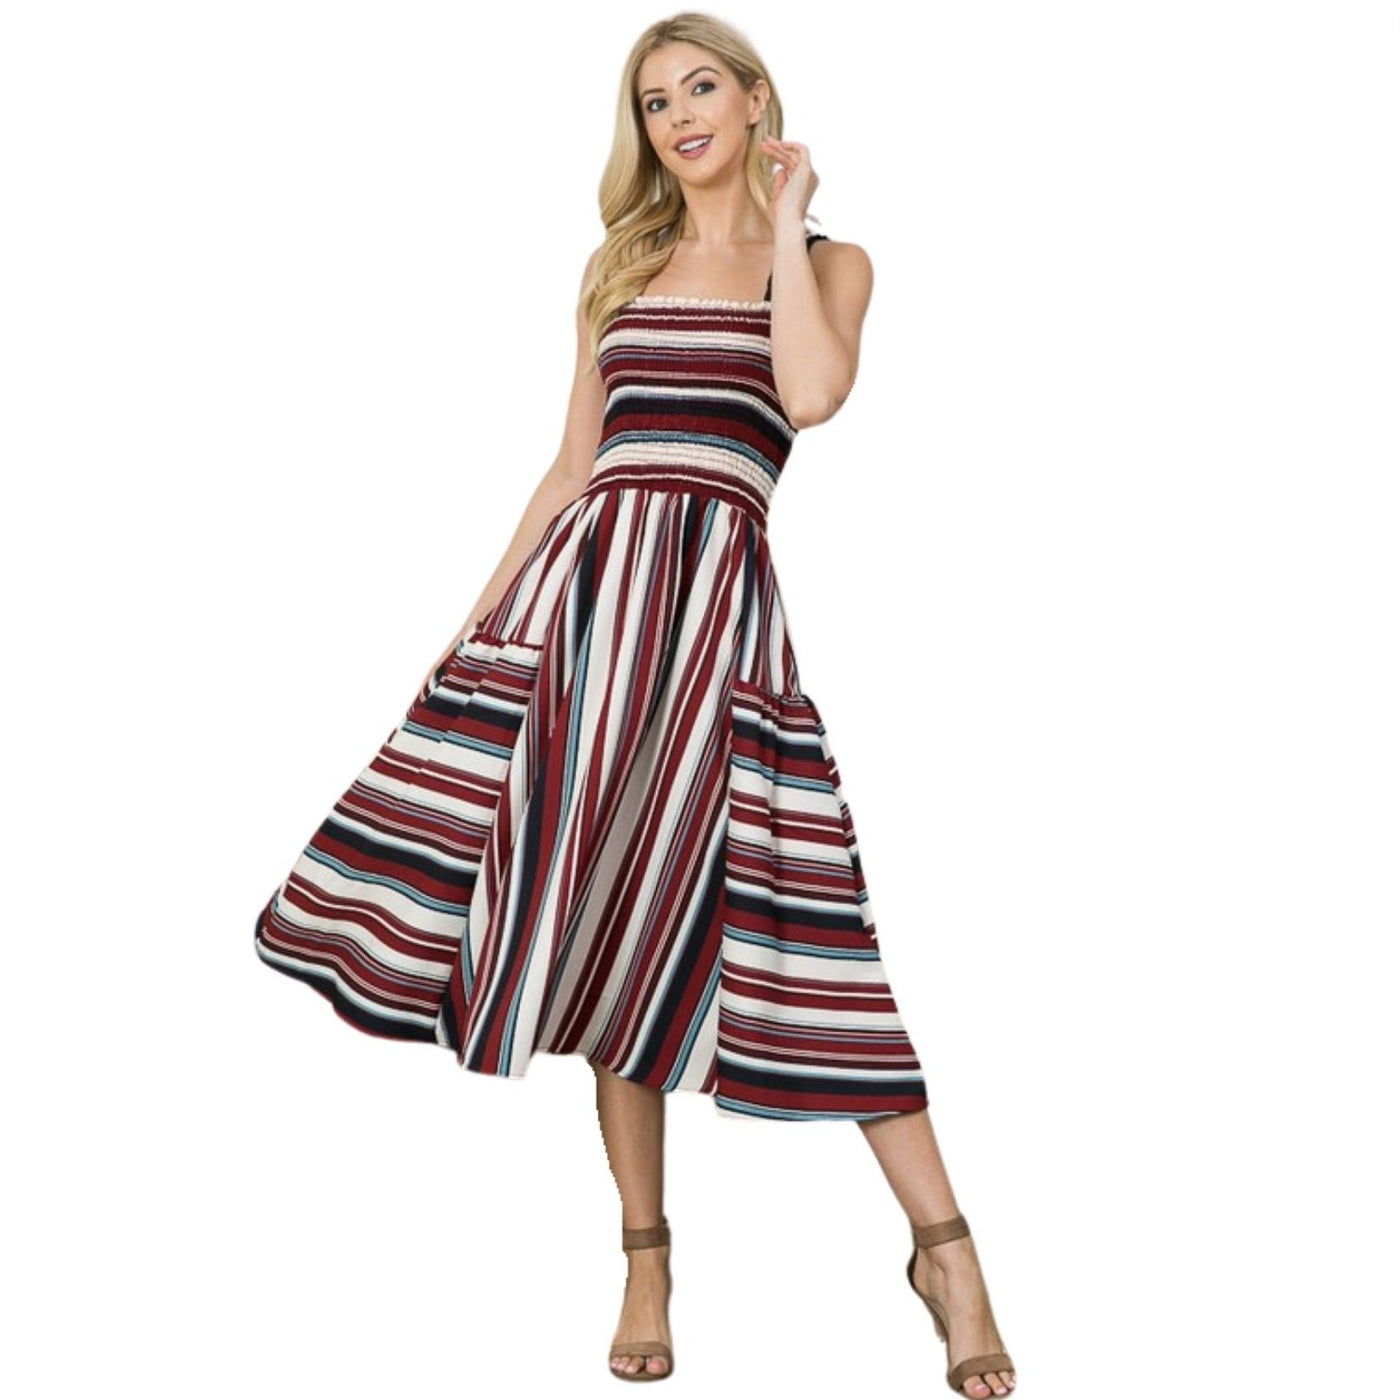 Made in USA Ladies Smocked Bodice Fit & Flair Dress with Side Pockets, Square Neckline, Shoulder Straps, Vertical & Horizontal Contrast Stripes | Colors in this Dress: Black, Burgundy, Off White, Slate Blue